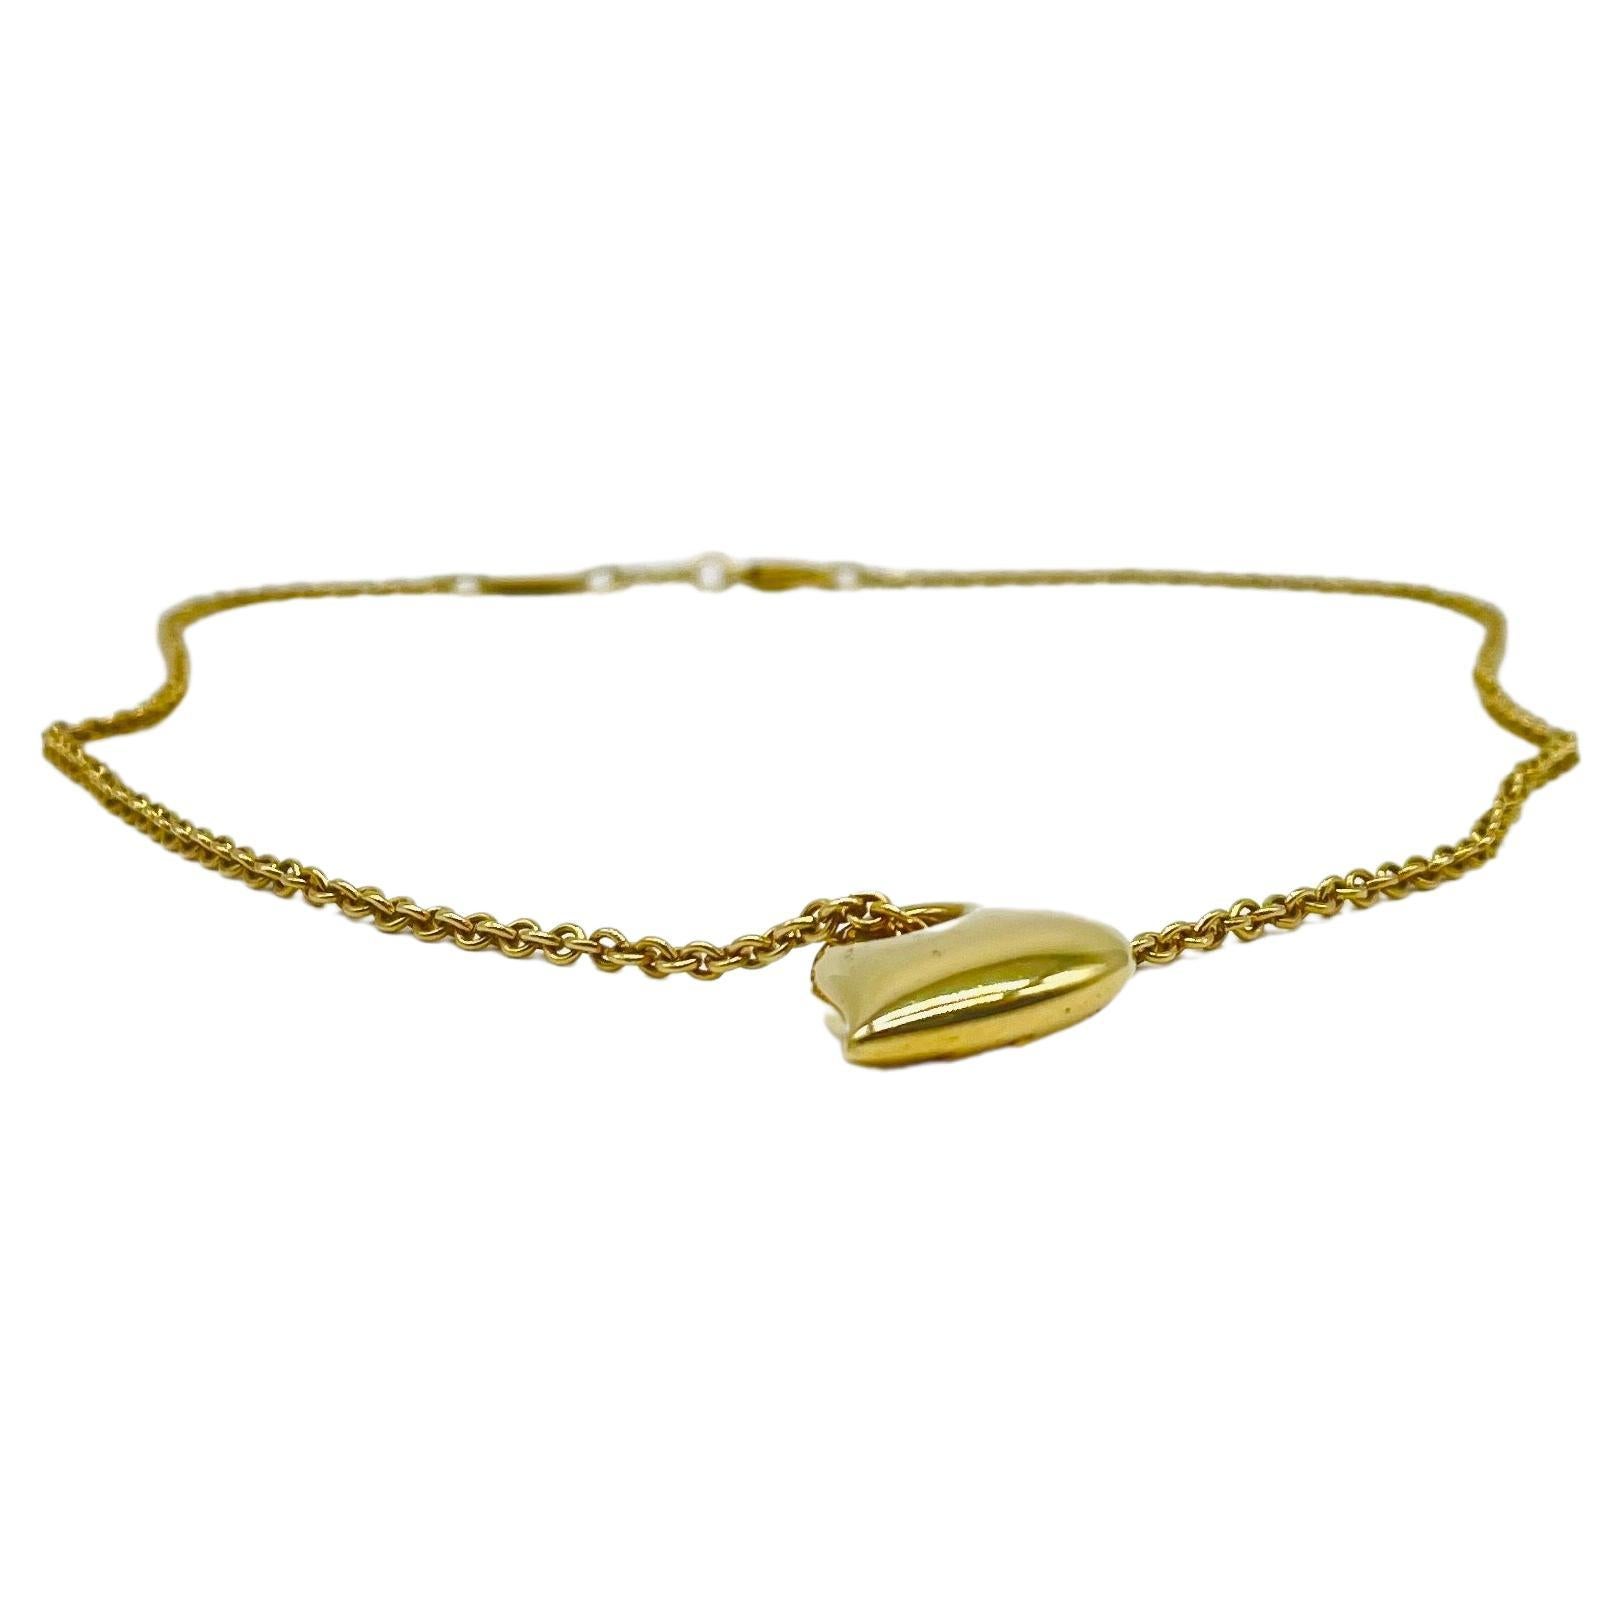 beautiful heart-shaped necklace in 14k yellow gold For Sale 4